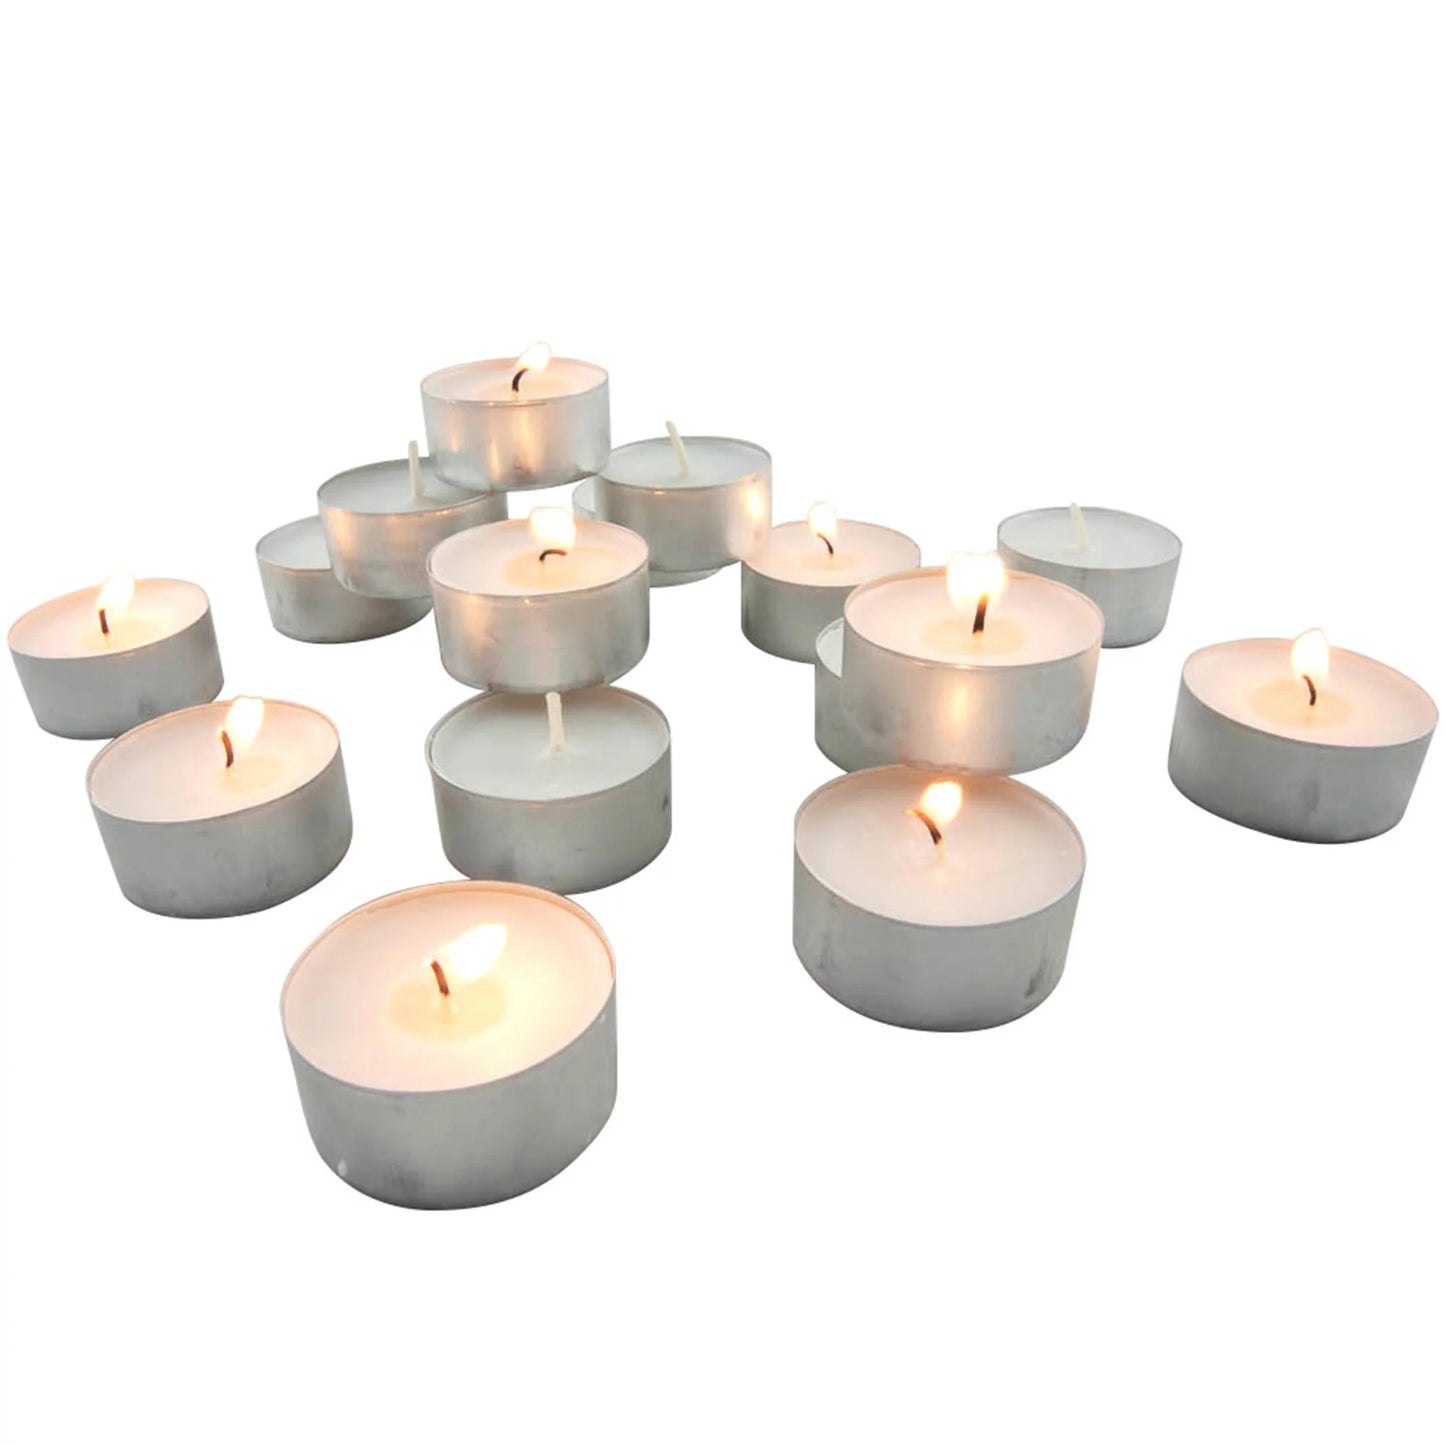 Tealight Candle - 6pcs (Unscented)